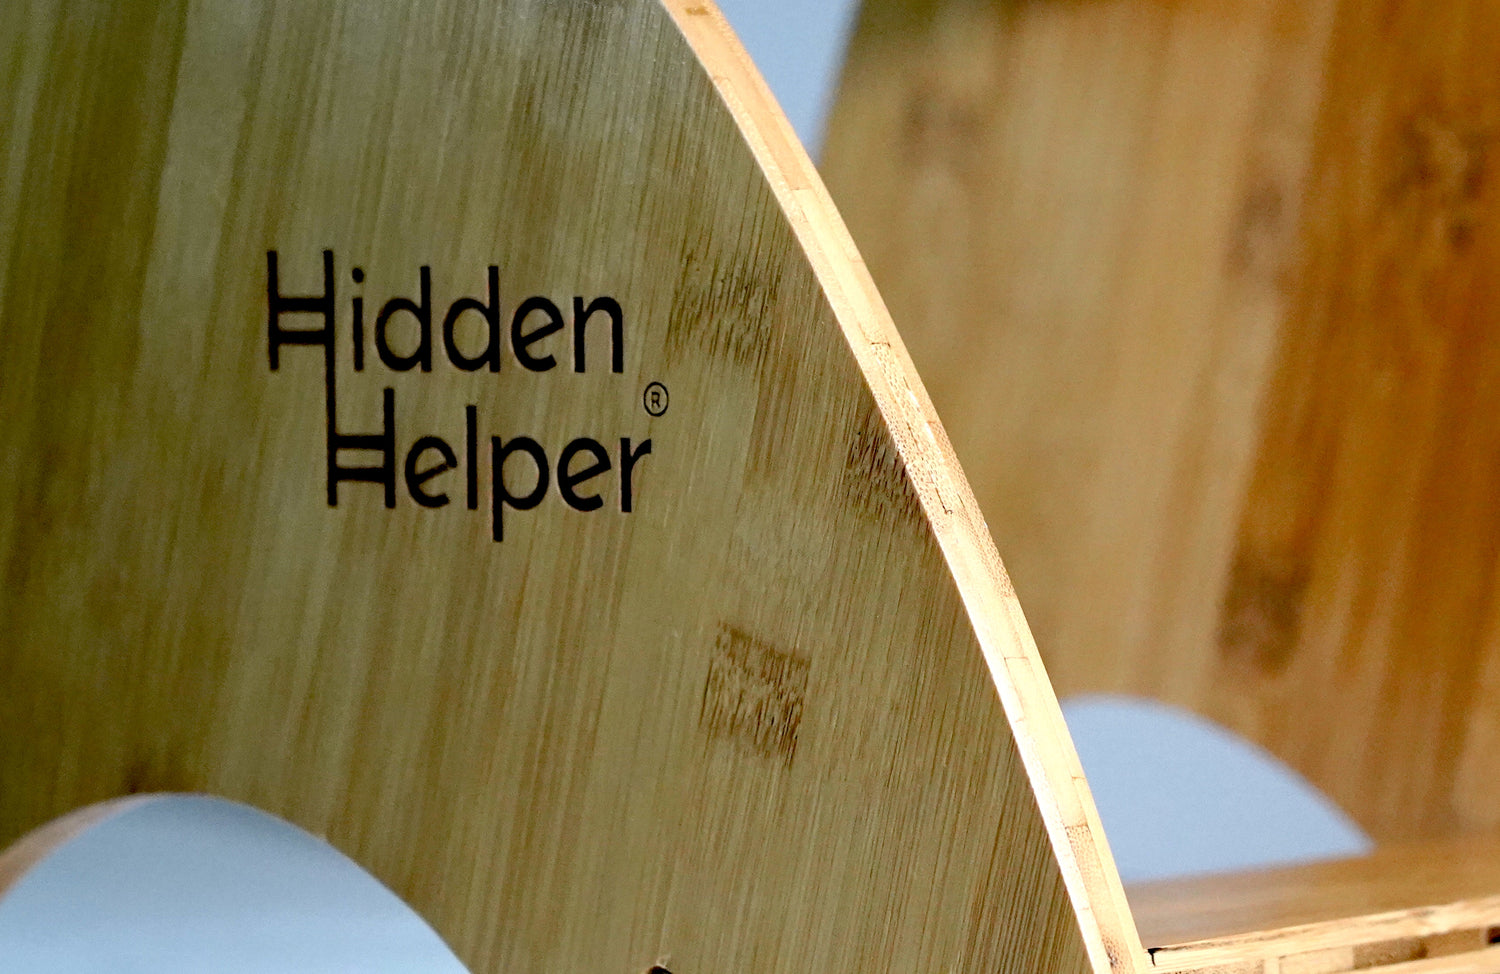 Close up of the HiddenHelper logo on the side of the stool upright